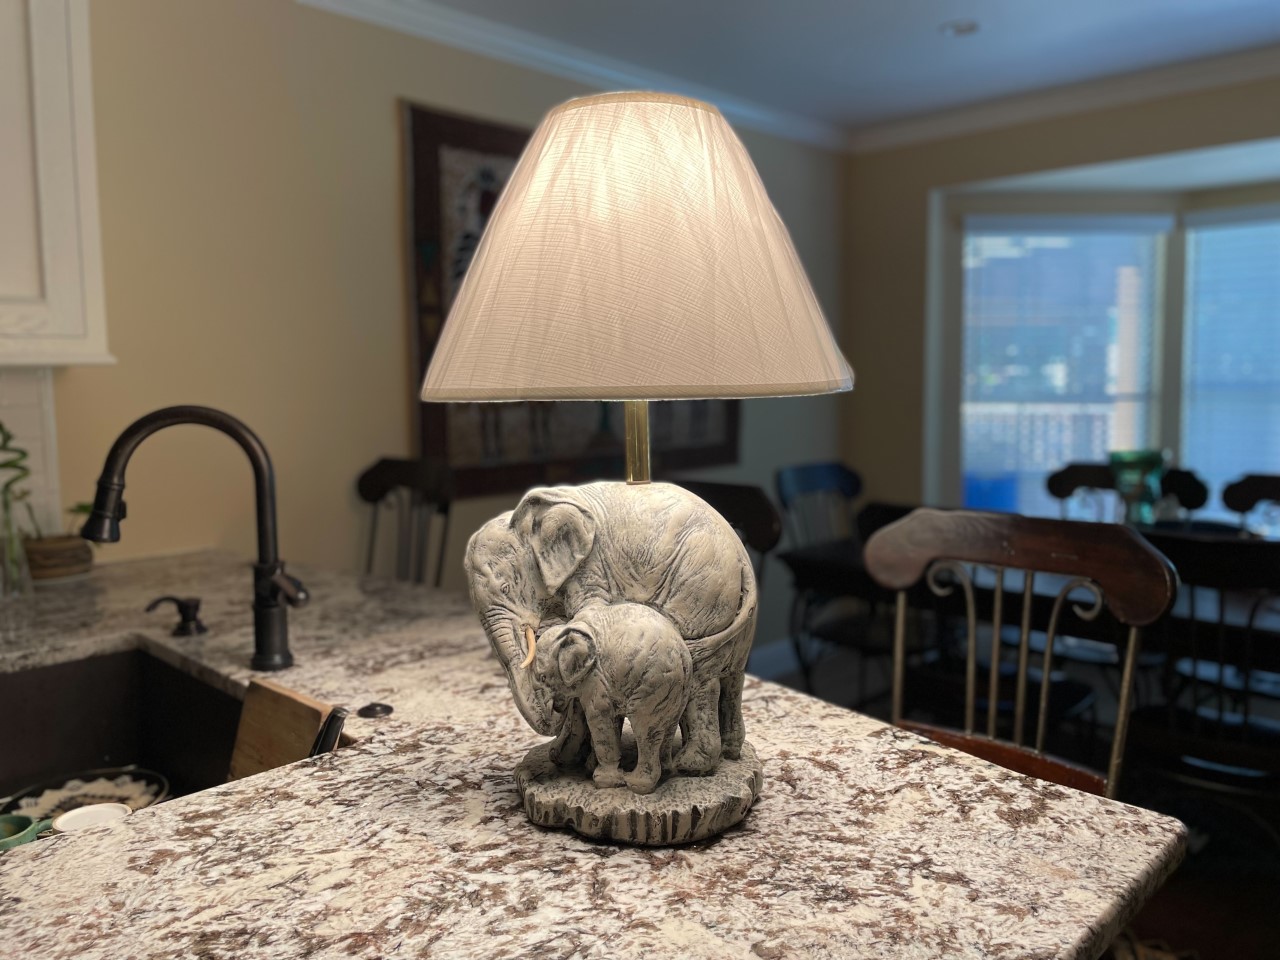 Image of elephant carved lamp